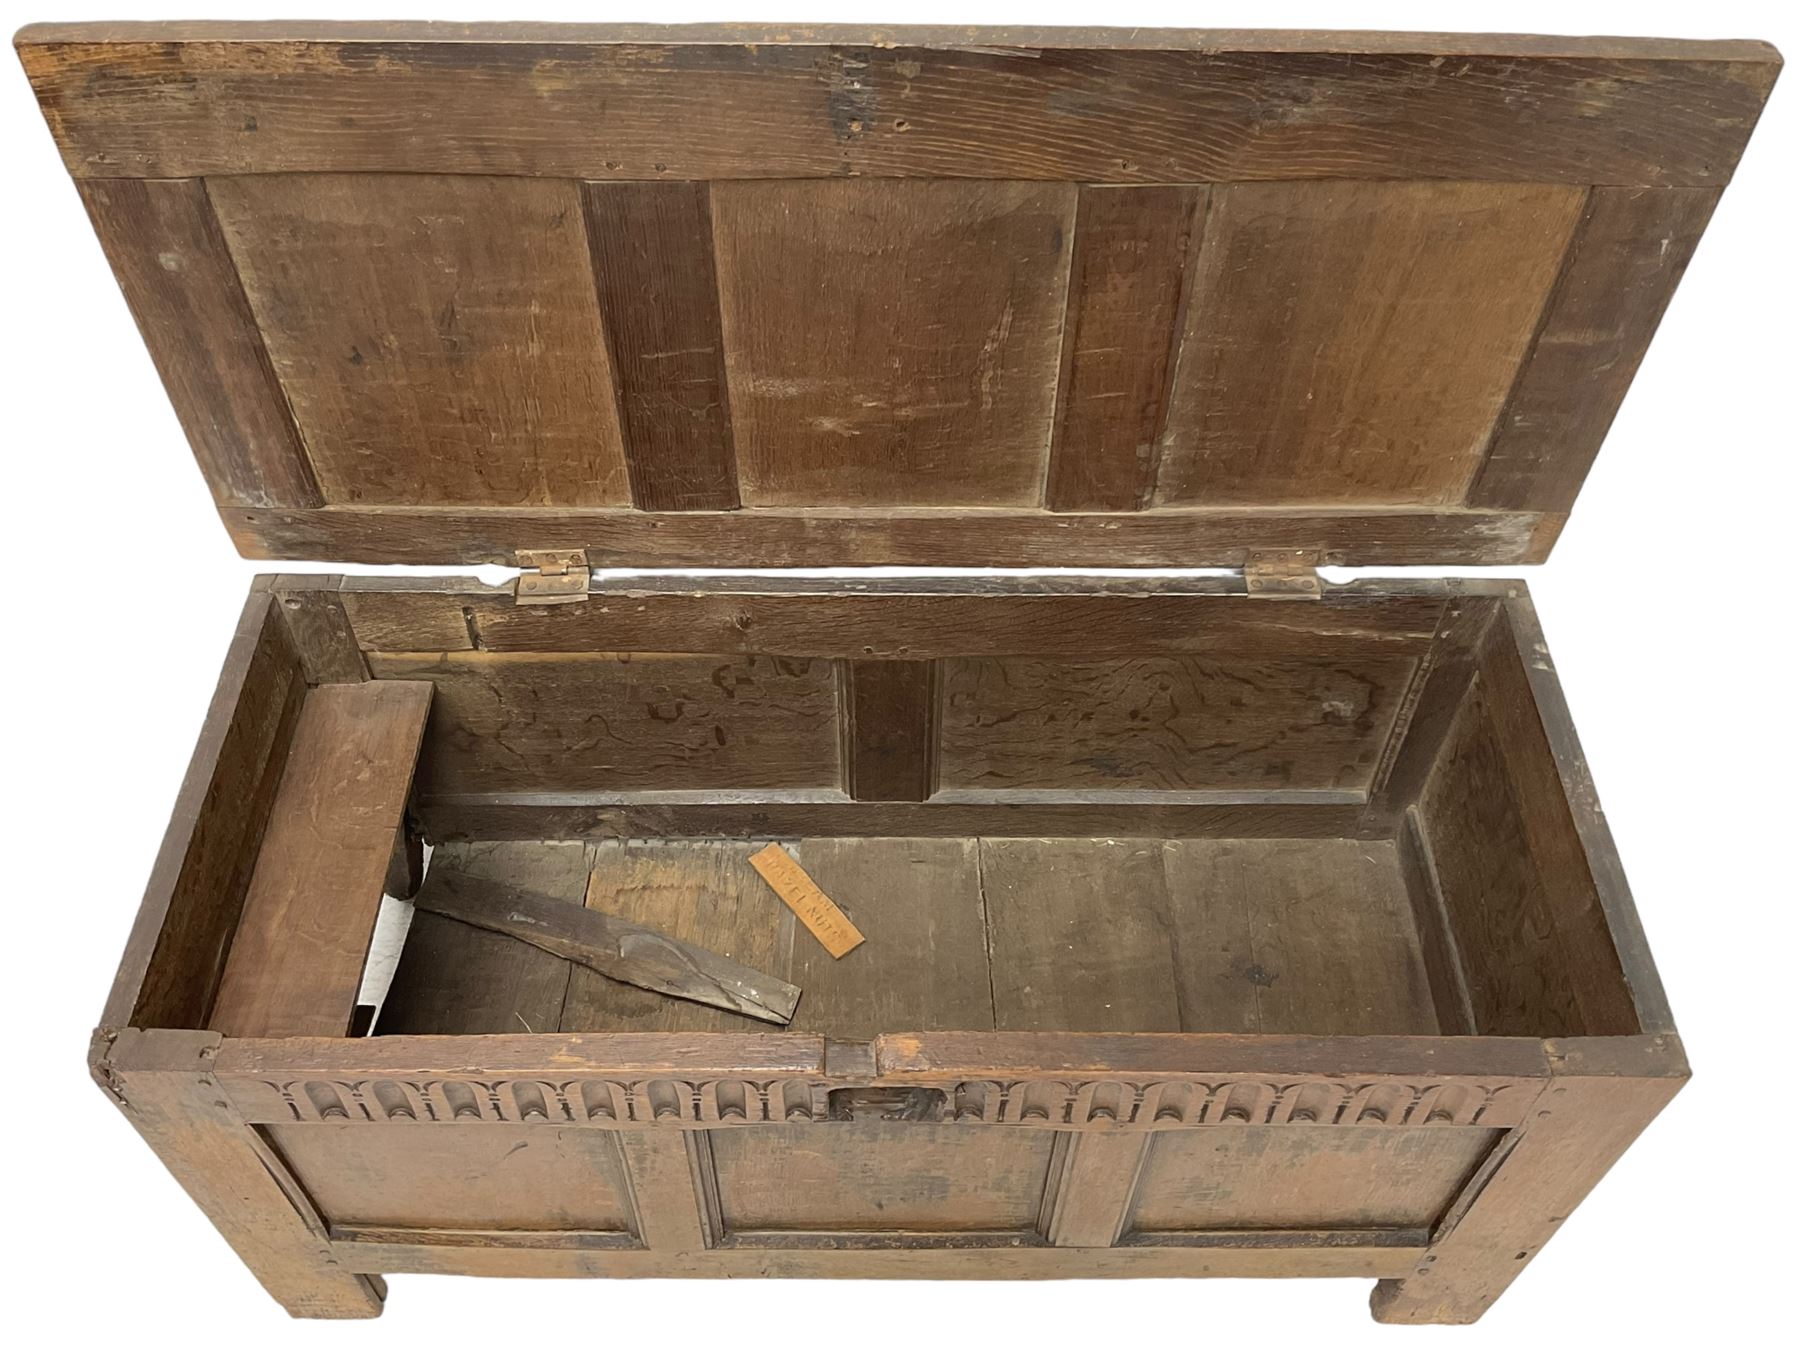 17th oak coffer or blanket chest - Image 6 of 6